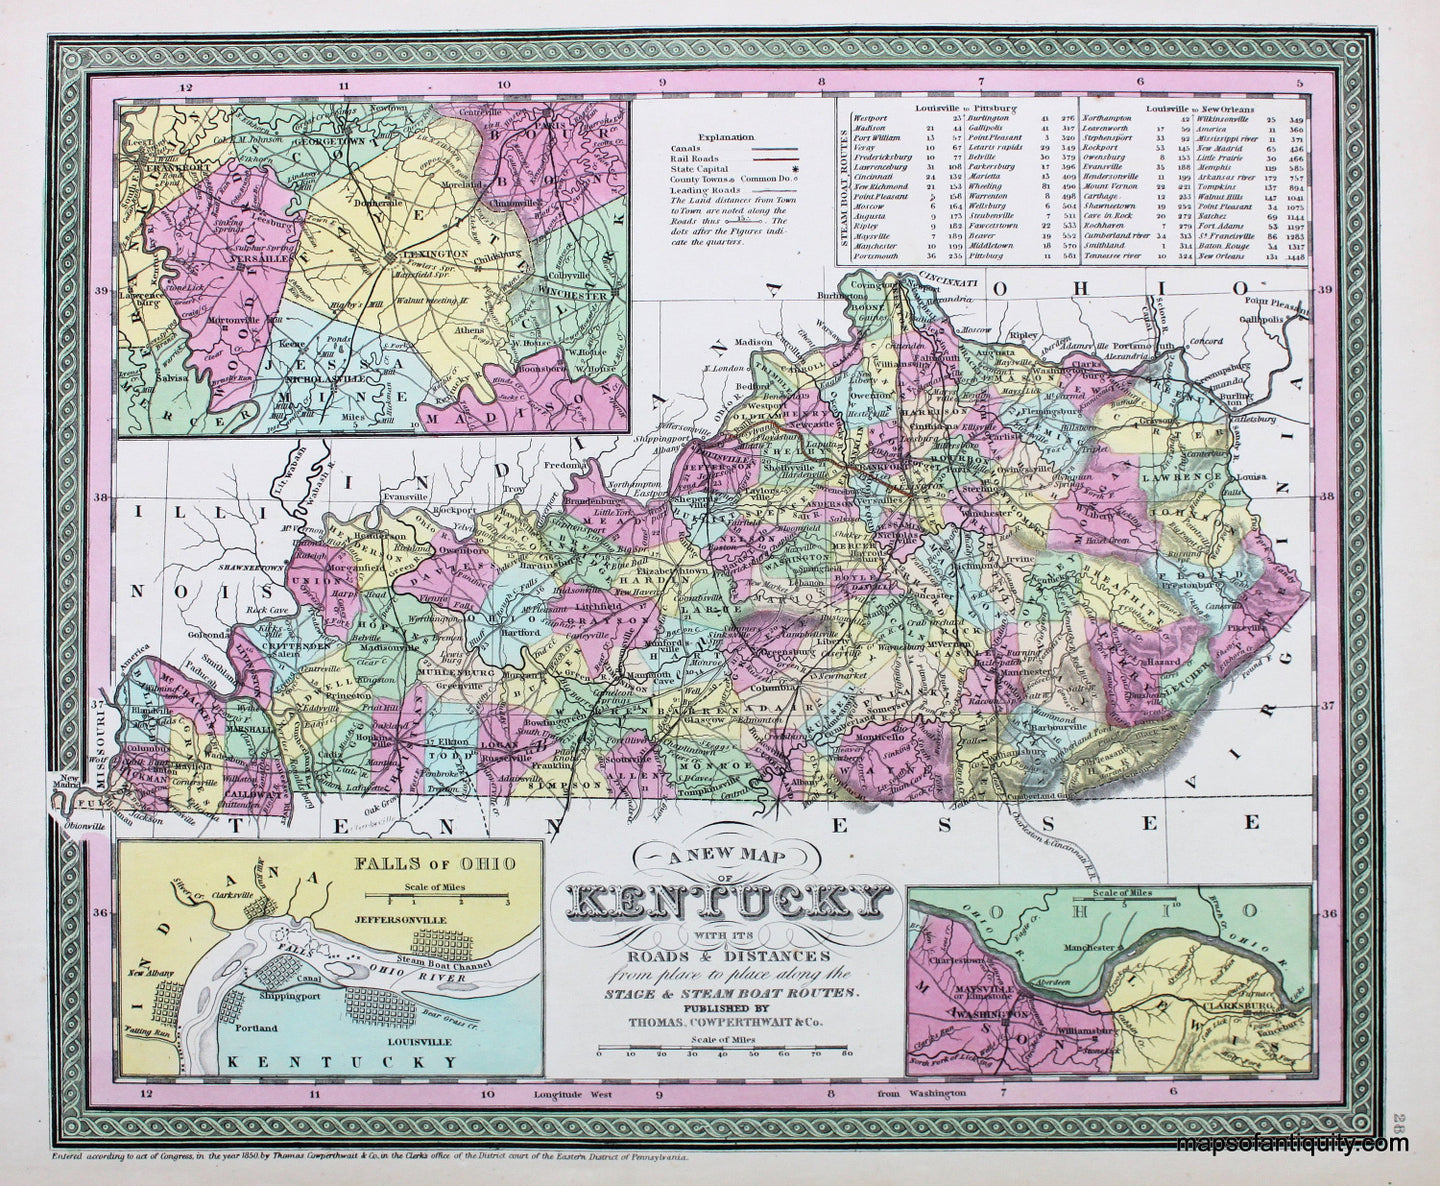 Antique-Hand-Colored-Map-A-New-Map-of-Kentucky-with-its-Roads-&-Distances-from-place-to-place-along-the-Stage-&-Steam-Boat-Routes.--United-States-South-1854-Mitchell/Cowperthwait-Desilver-&-Butler-Maps-Of-Antiquity